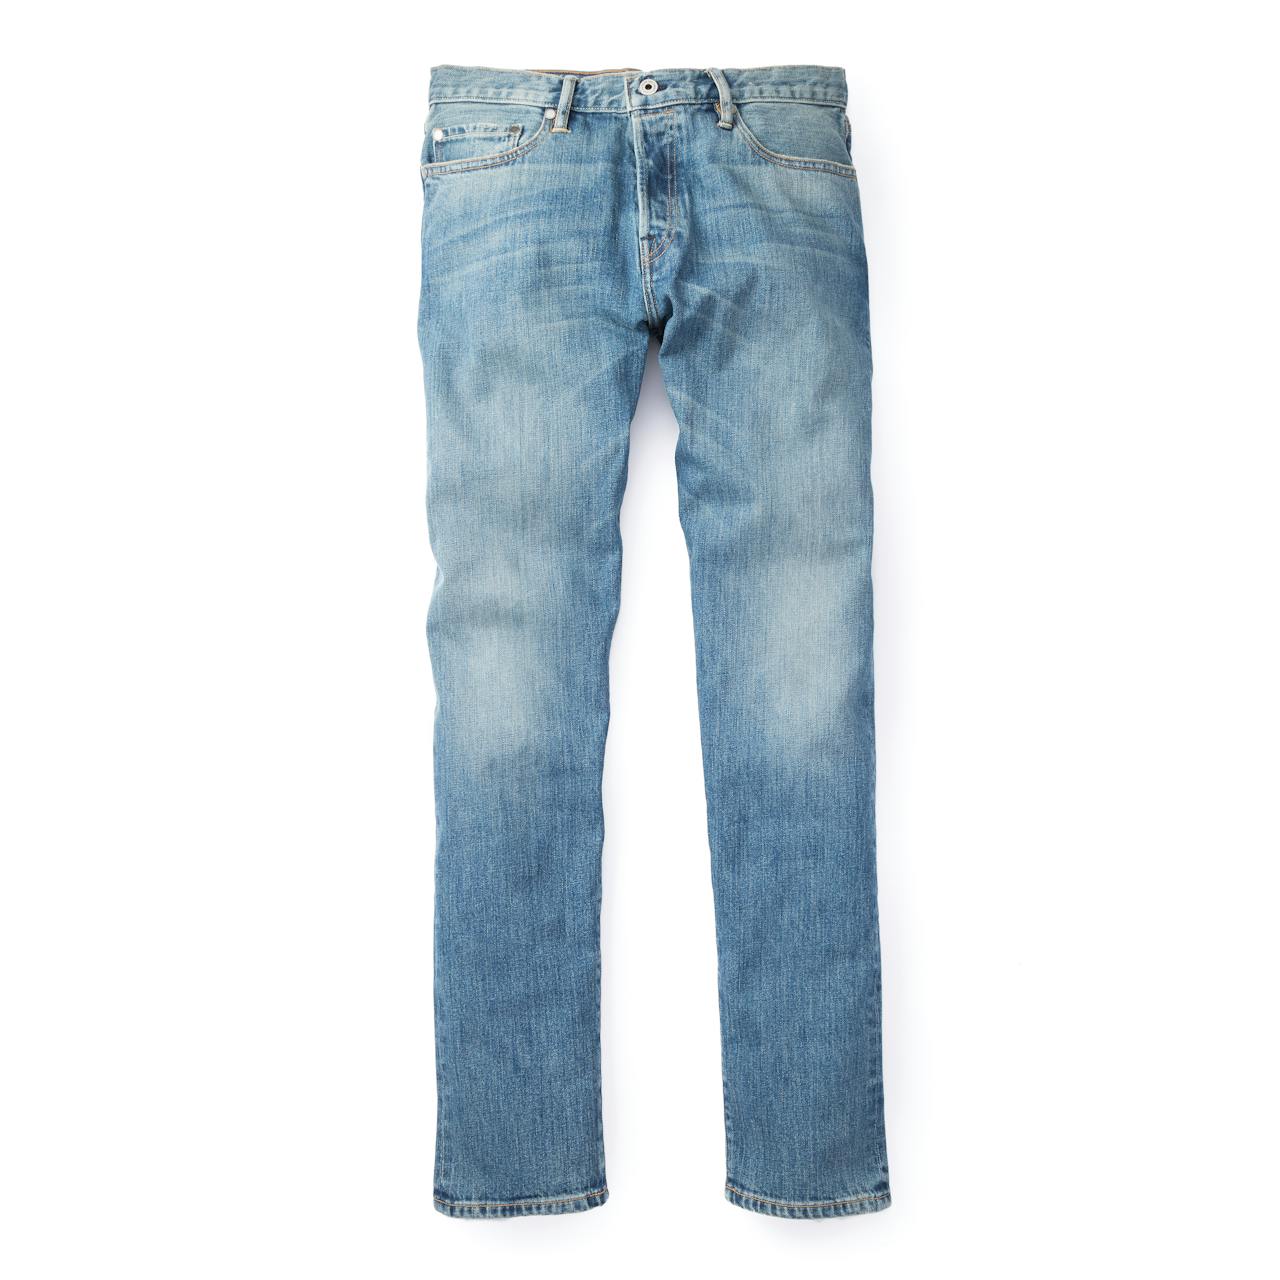 Flint and Tinder All-American Washed Jeans - Slim Tapered